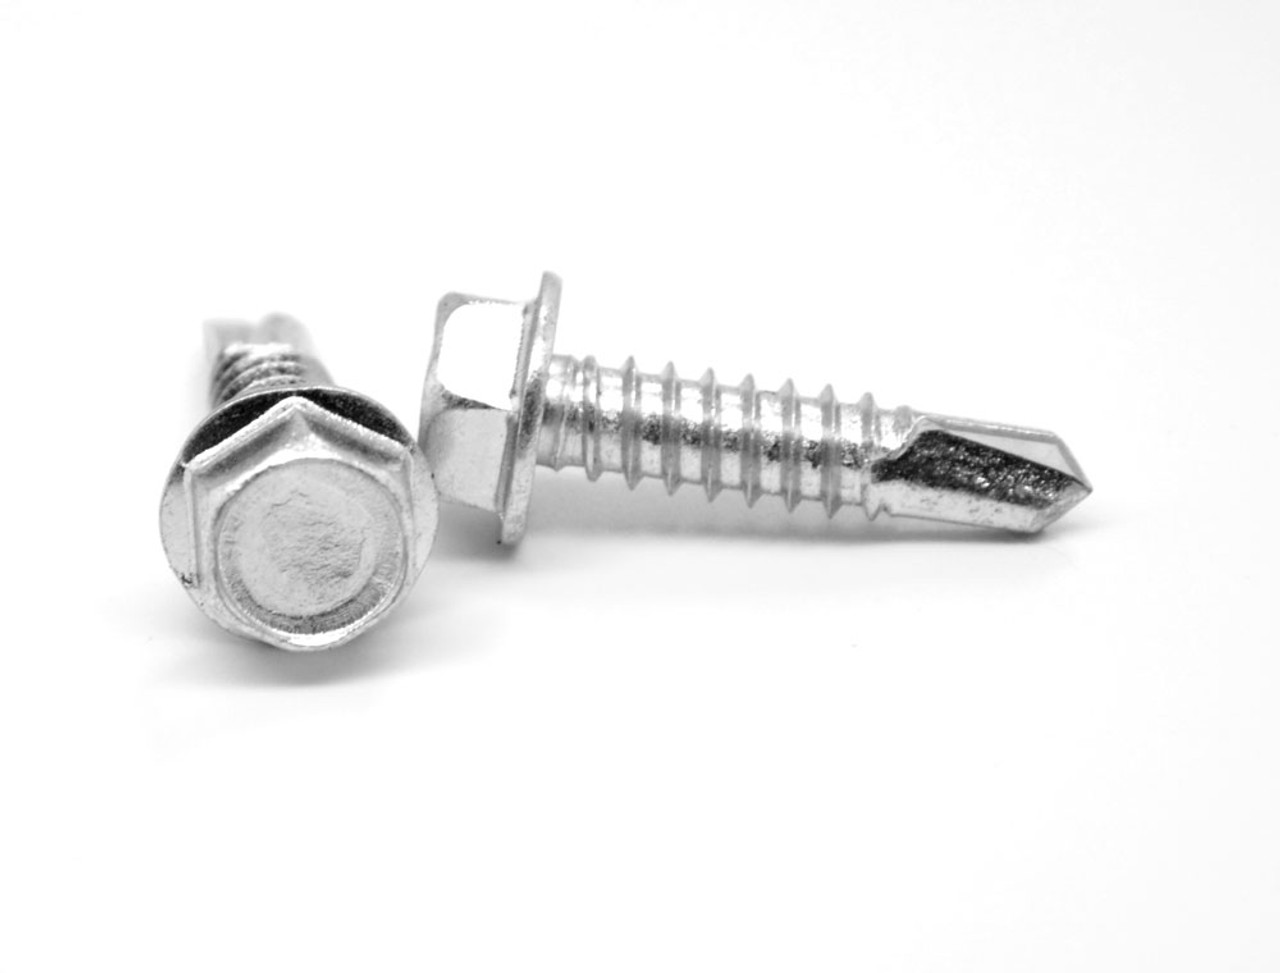 #6-20 x 1/2" (FT) Self Drilling Screw Hex Washer Head #2 Point Stainless Steel 410